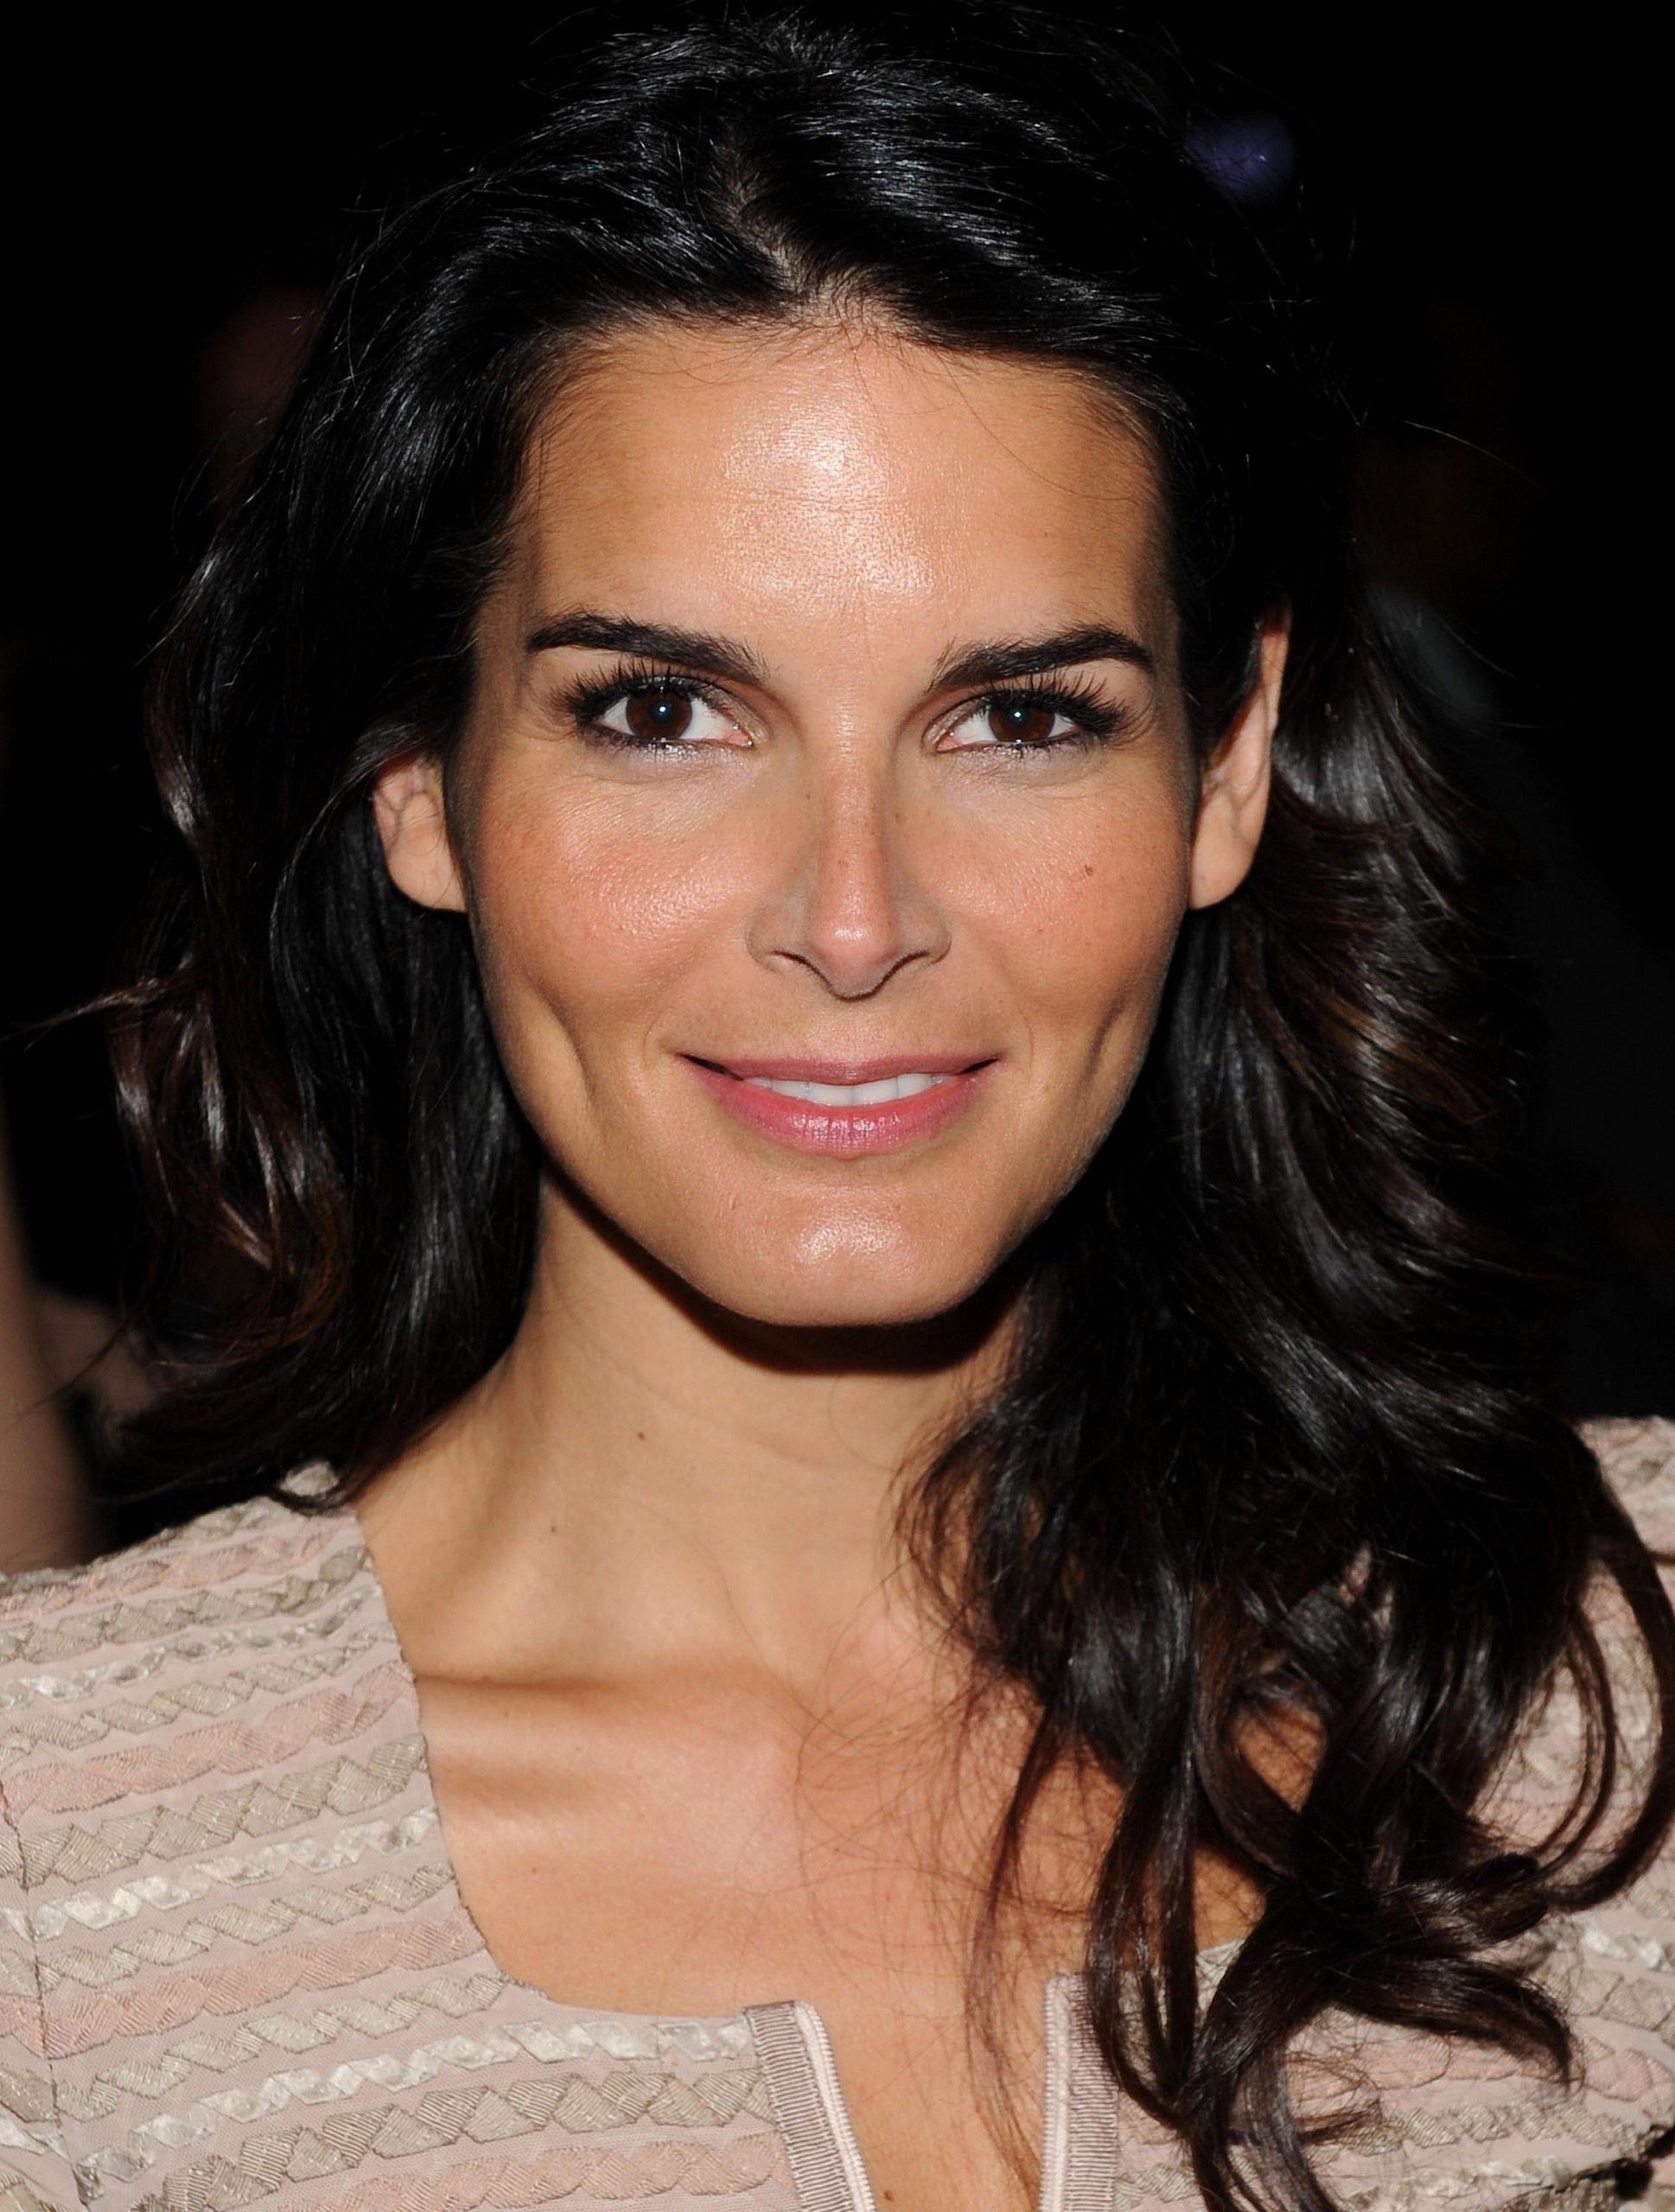 Angie Harmon Angie Harmon HD Wallpaper for desktop download. Angie